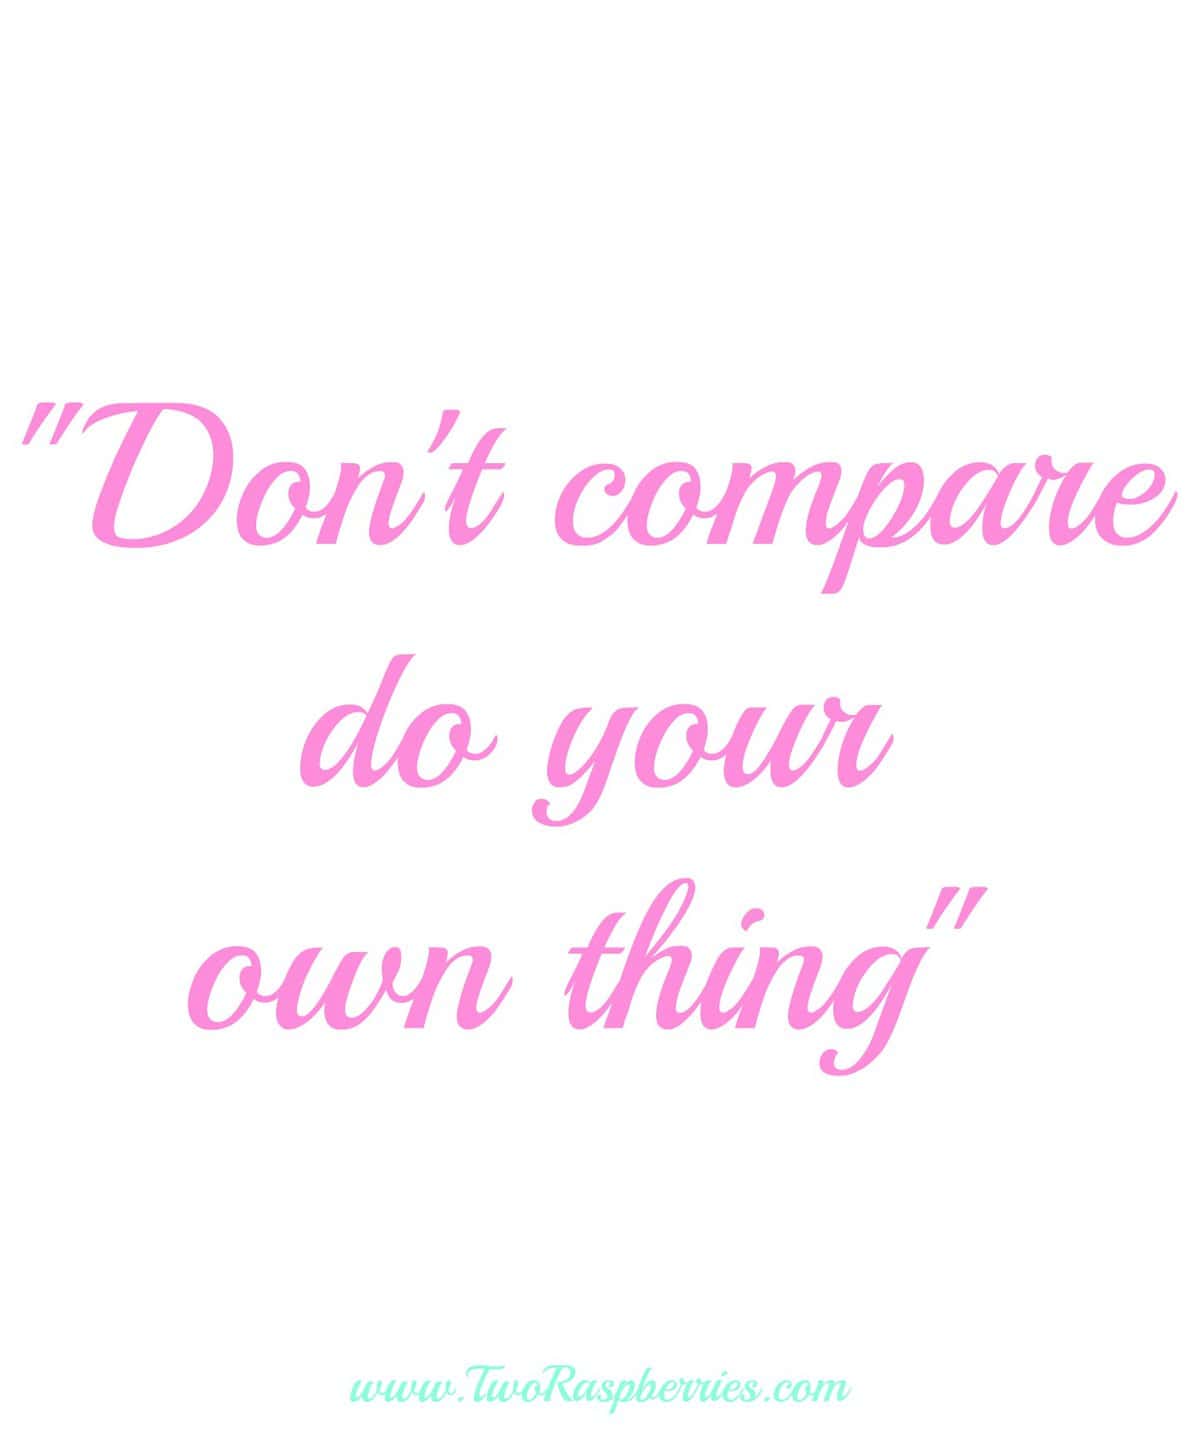  "Don't compare-do your own thing" inspirational motivational quotes